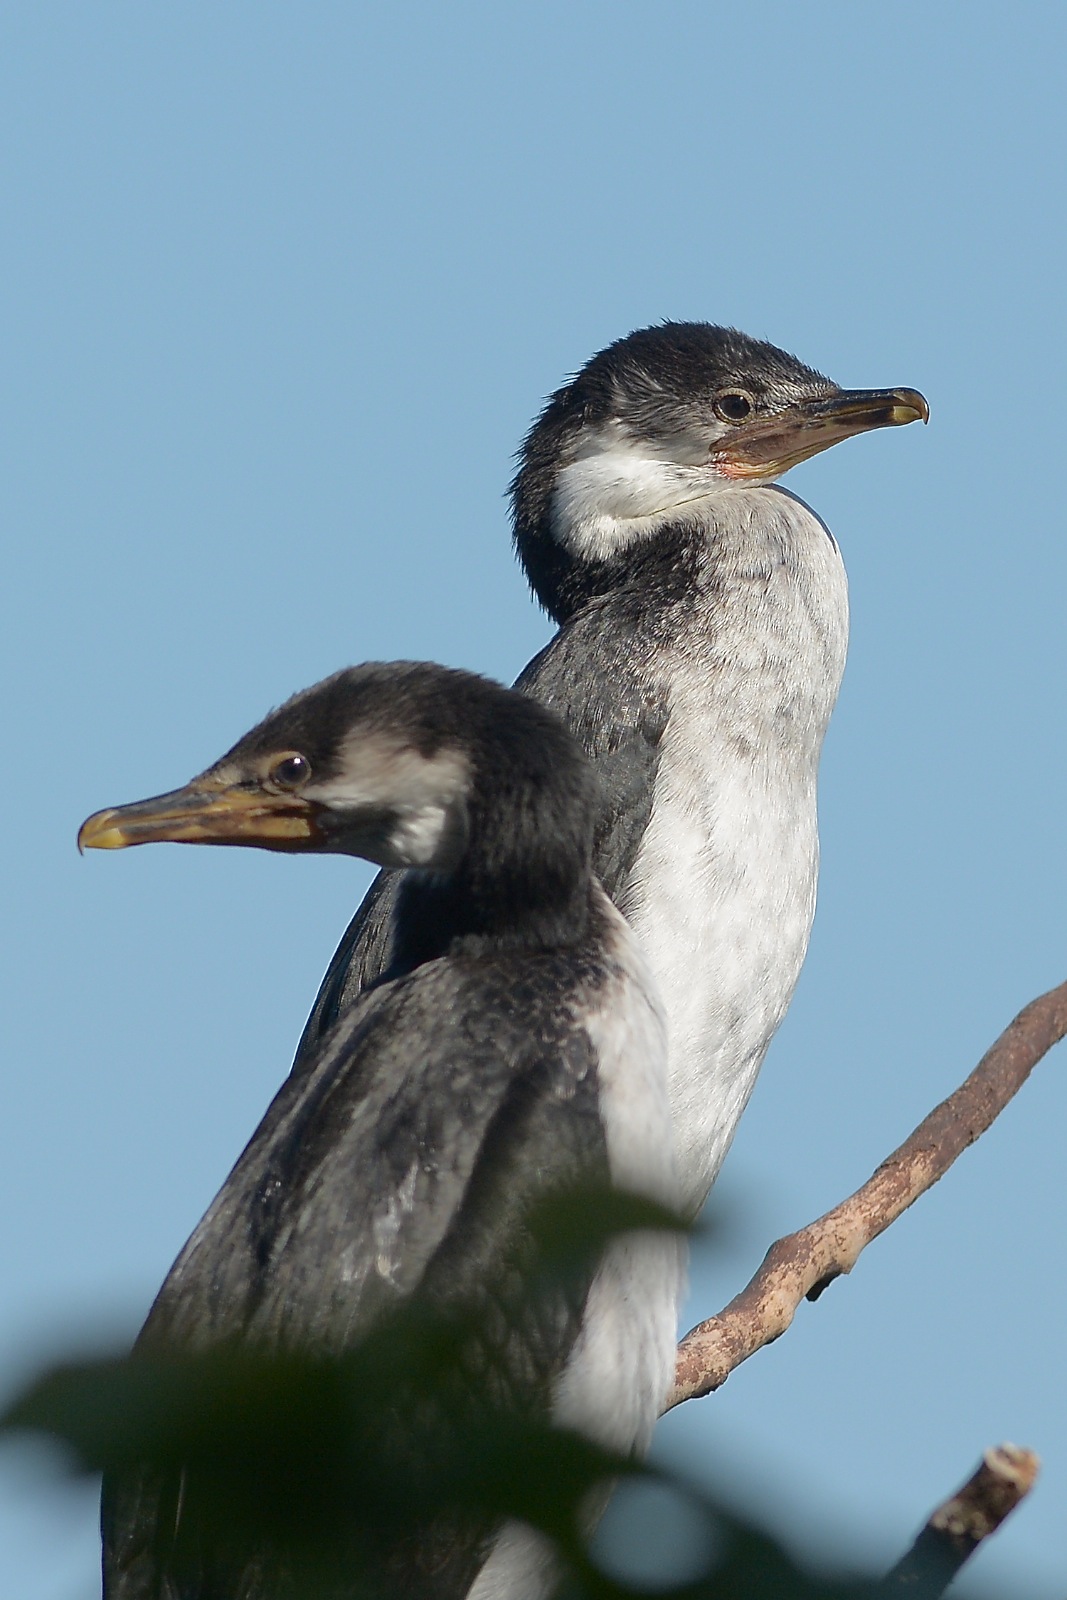 Not only Darters, but a range of Cormorants as well. 